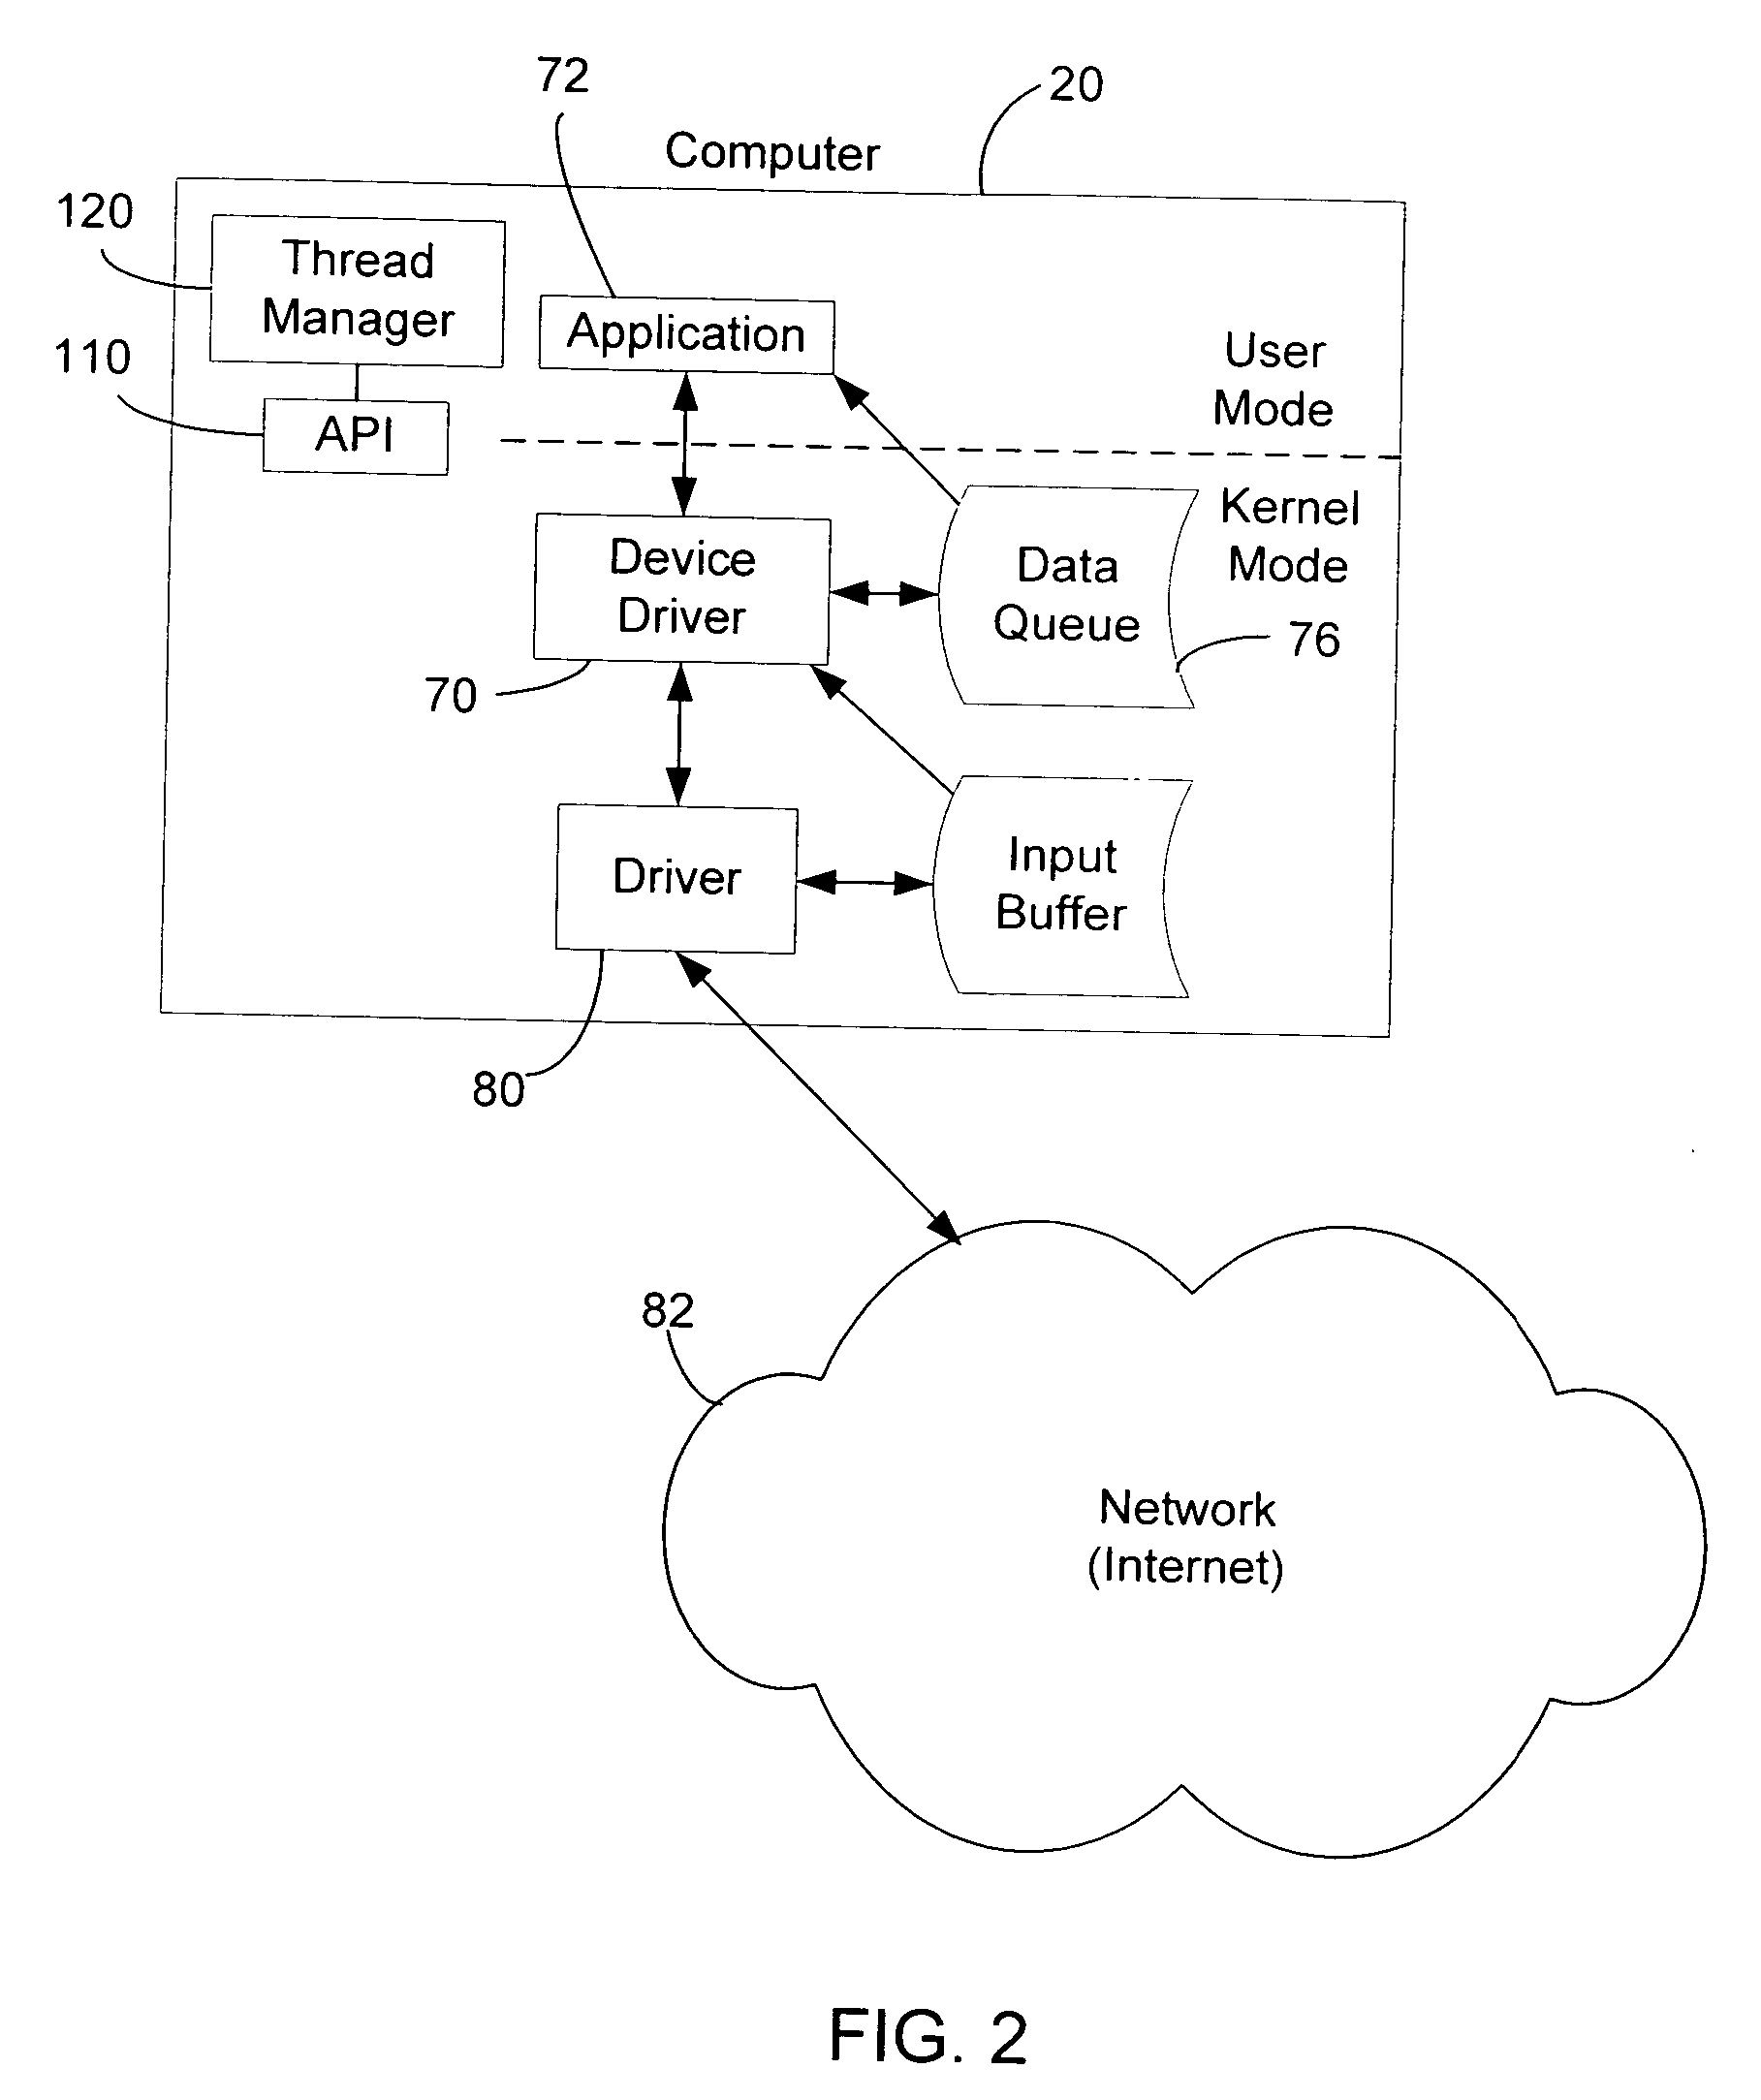 System and method for increasing data throughput using thread scheduling